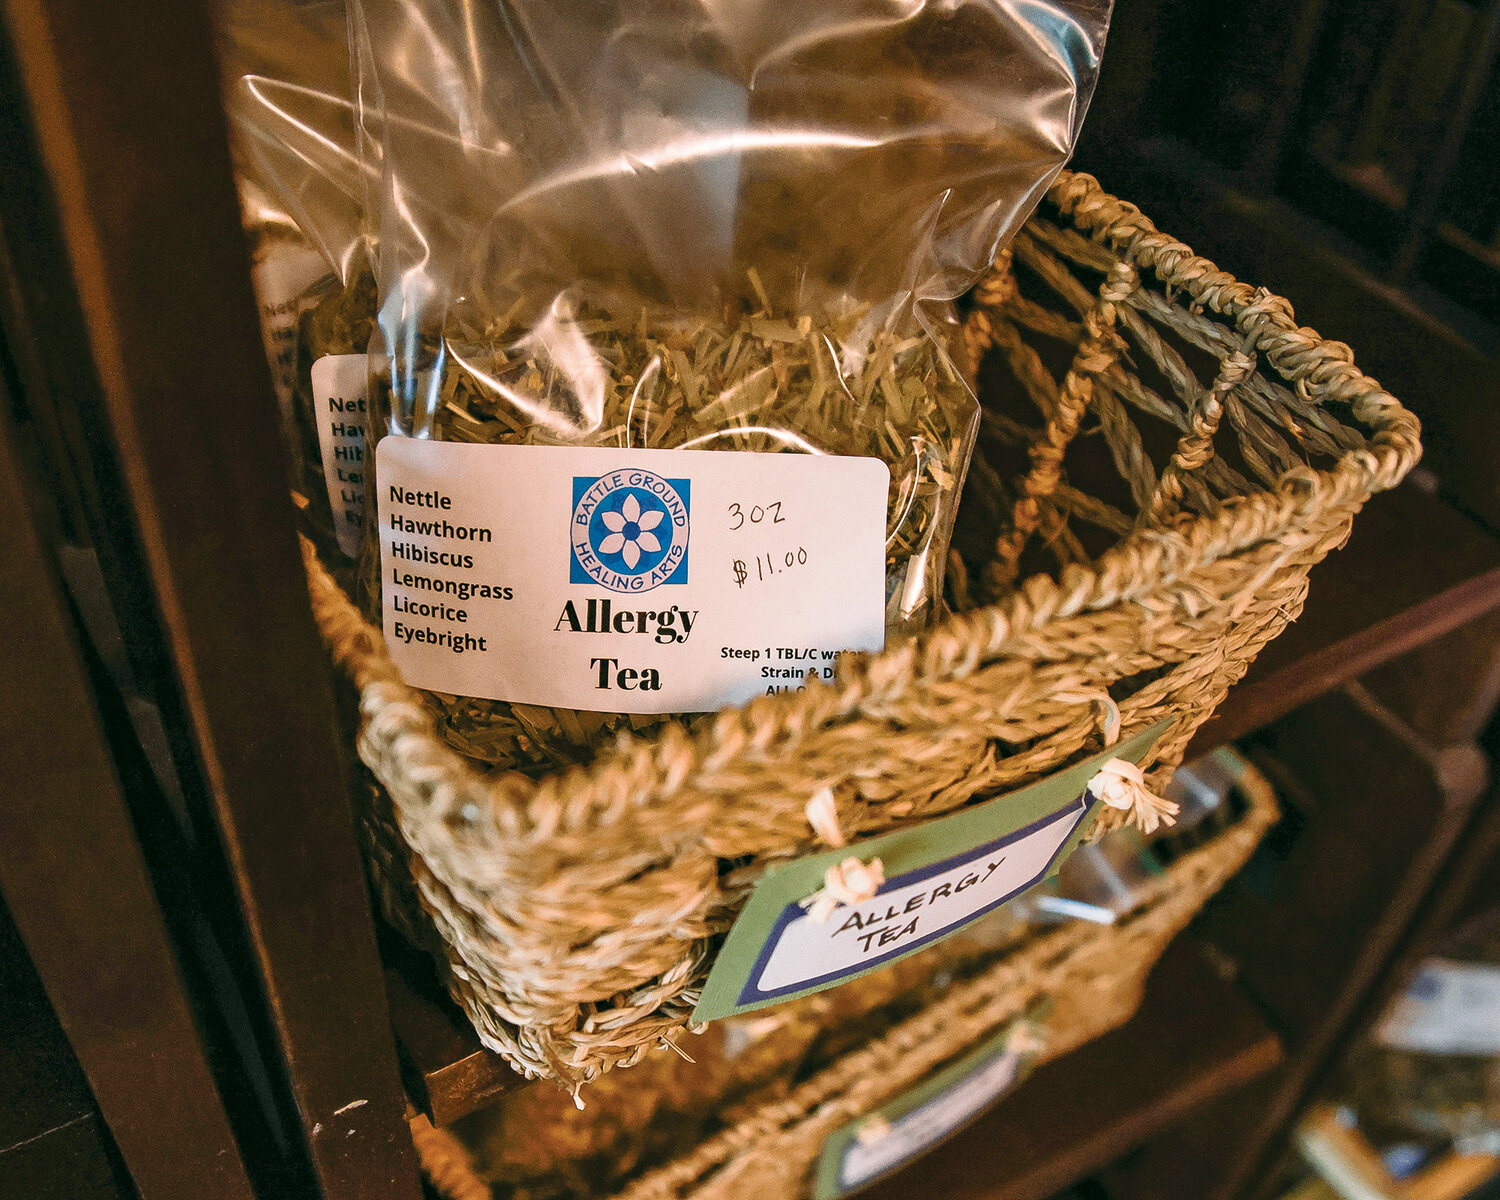 Pre-made tea packages for various reliefs are available in the apothecary at Battle Ground Healing Arts and Apothecary.